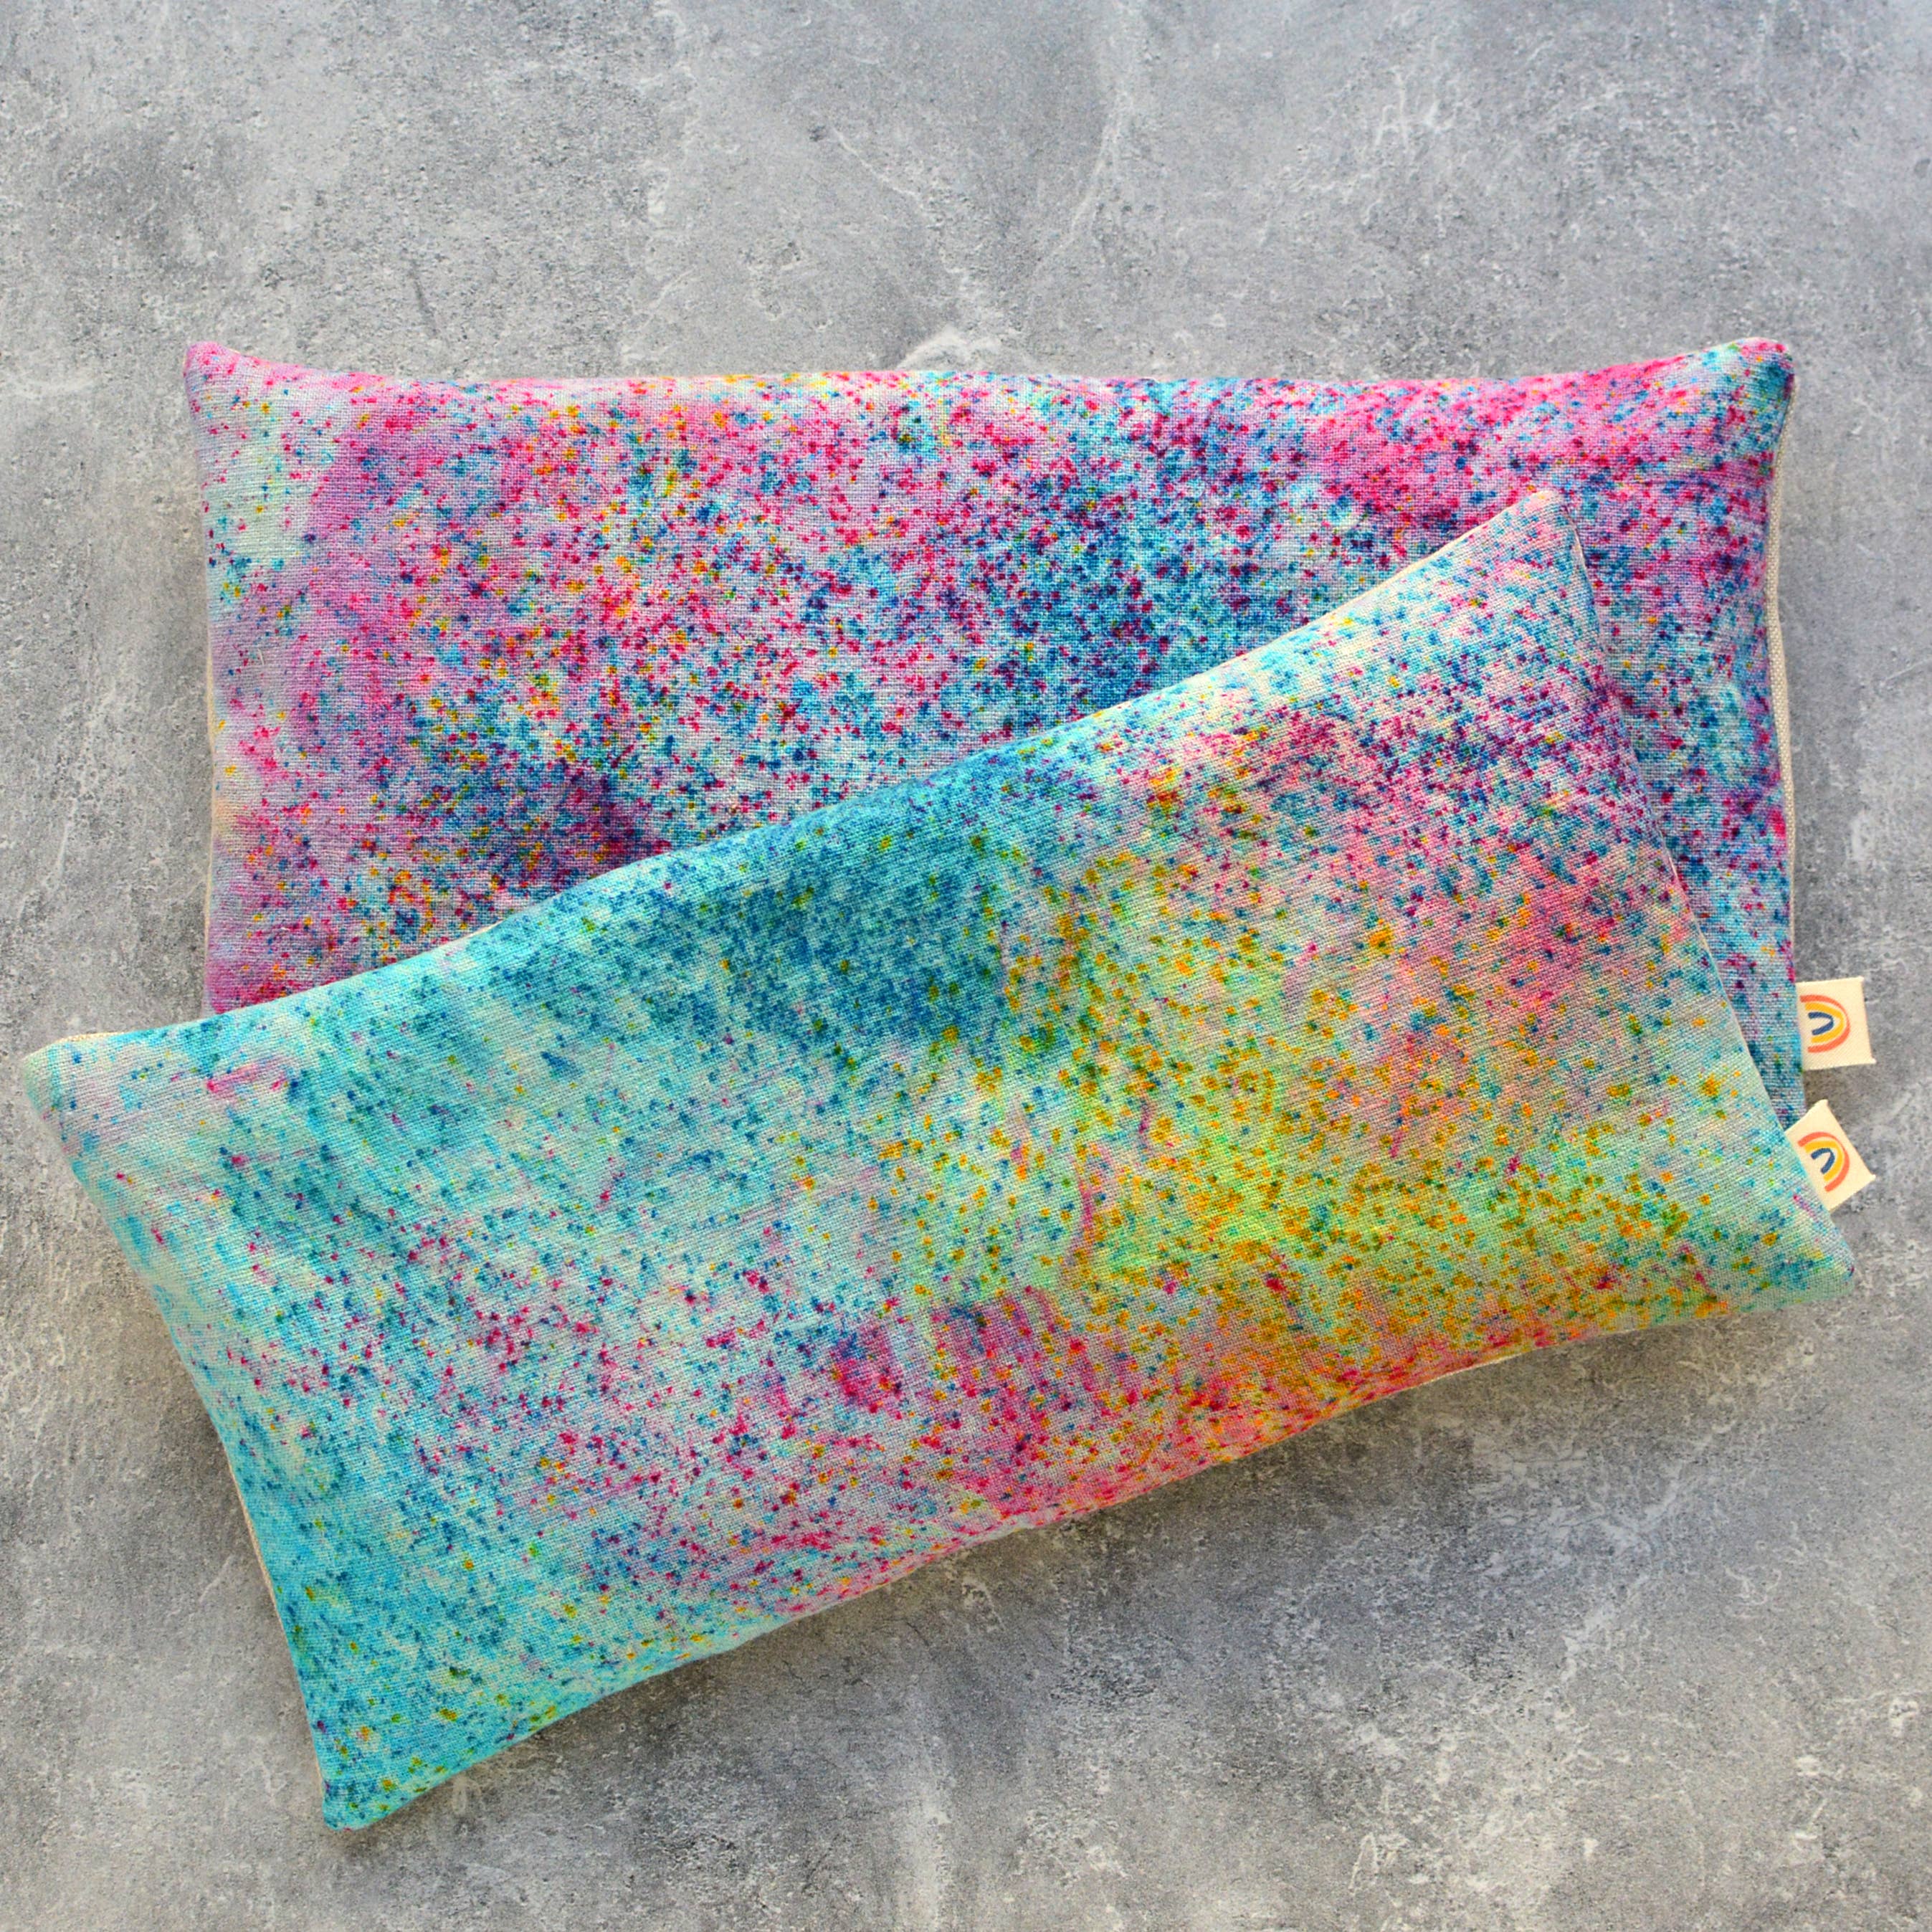 Weighted Eye Pillow in Bright Dust Dye Rainbow by Minor Thread. Lavender Eye Pillow